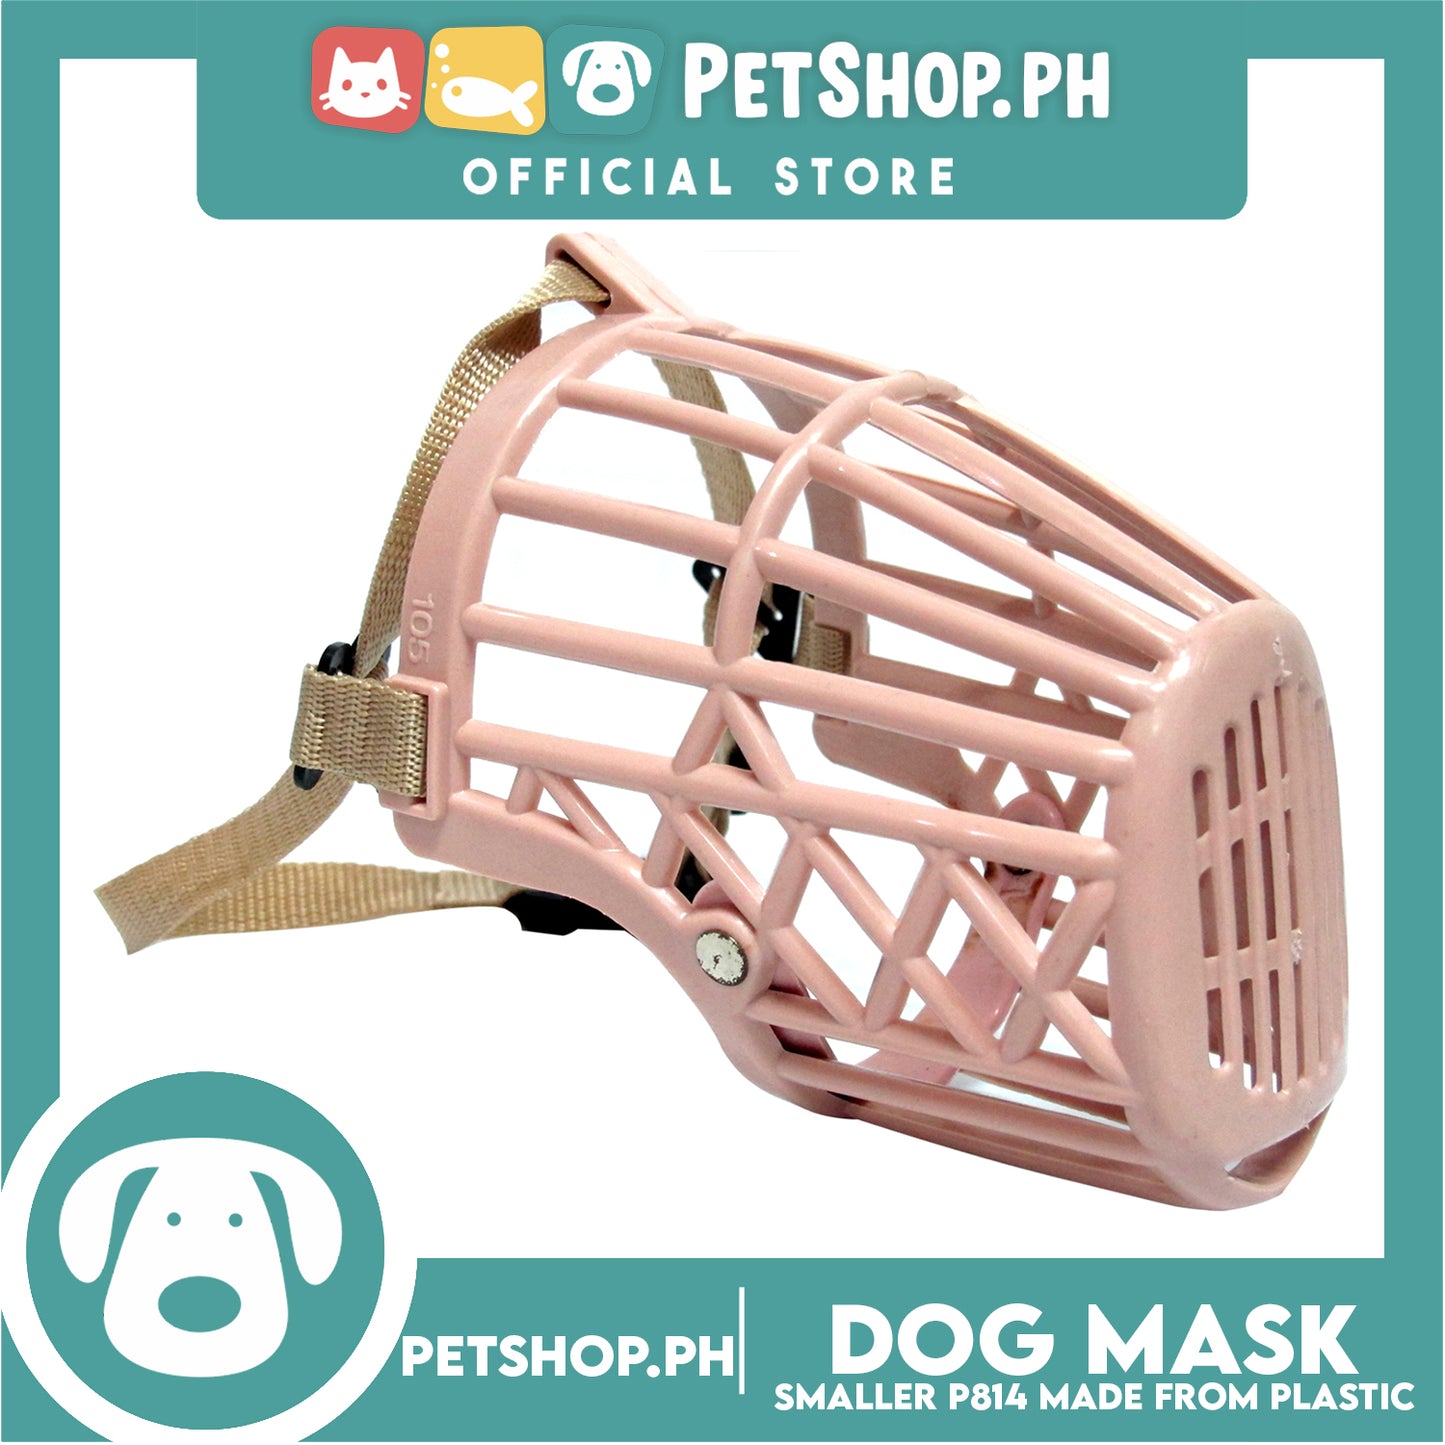 Dog Muzzle Soft Silicone Muzzle Adjustable Mask #1 P814 (XS) for Small Dogs, Puppies